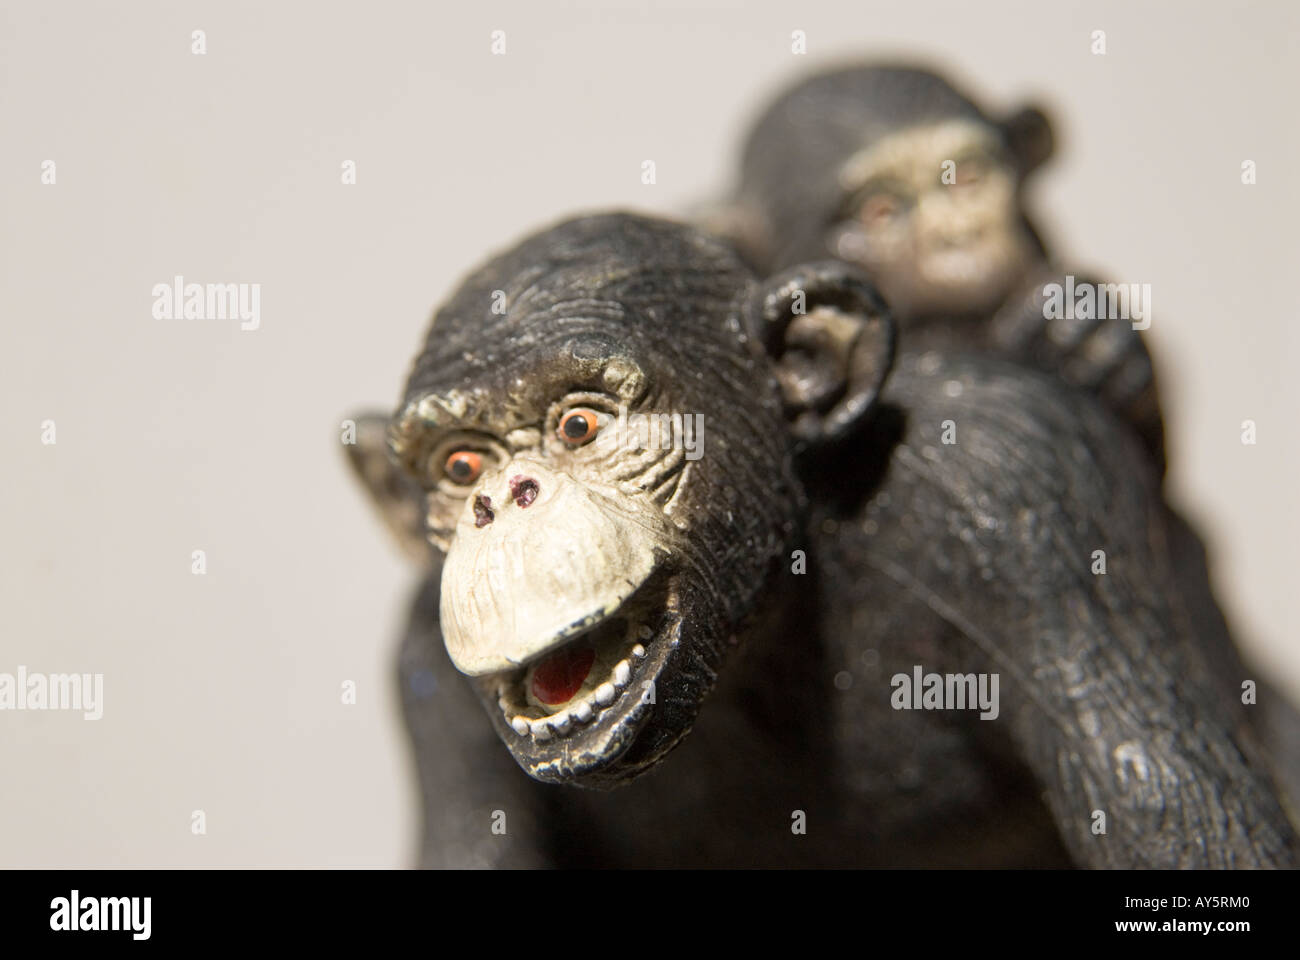 toy chimpanzee with baby on its back Stock Photo